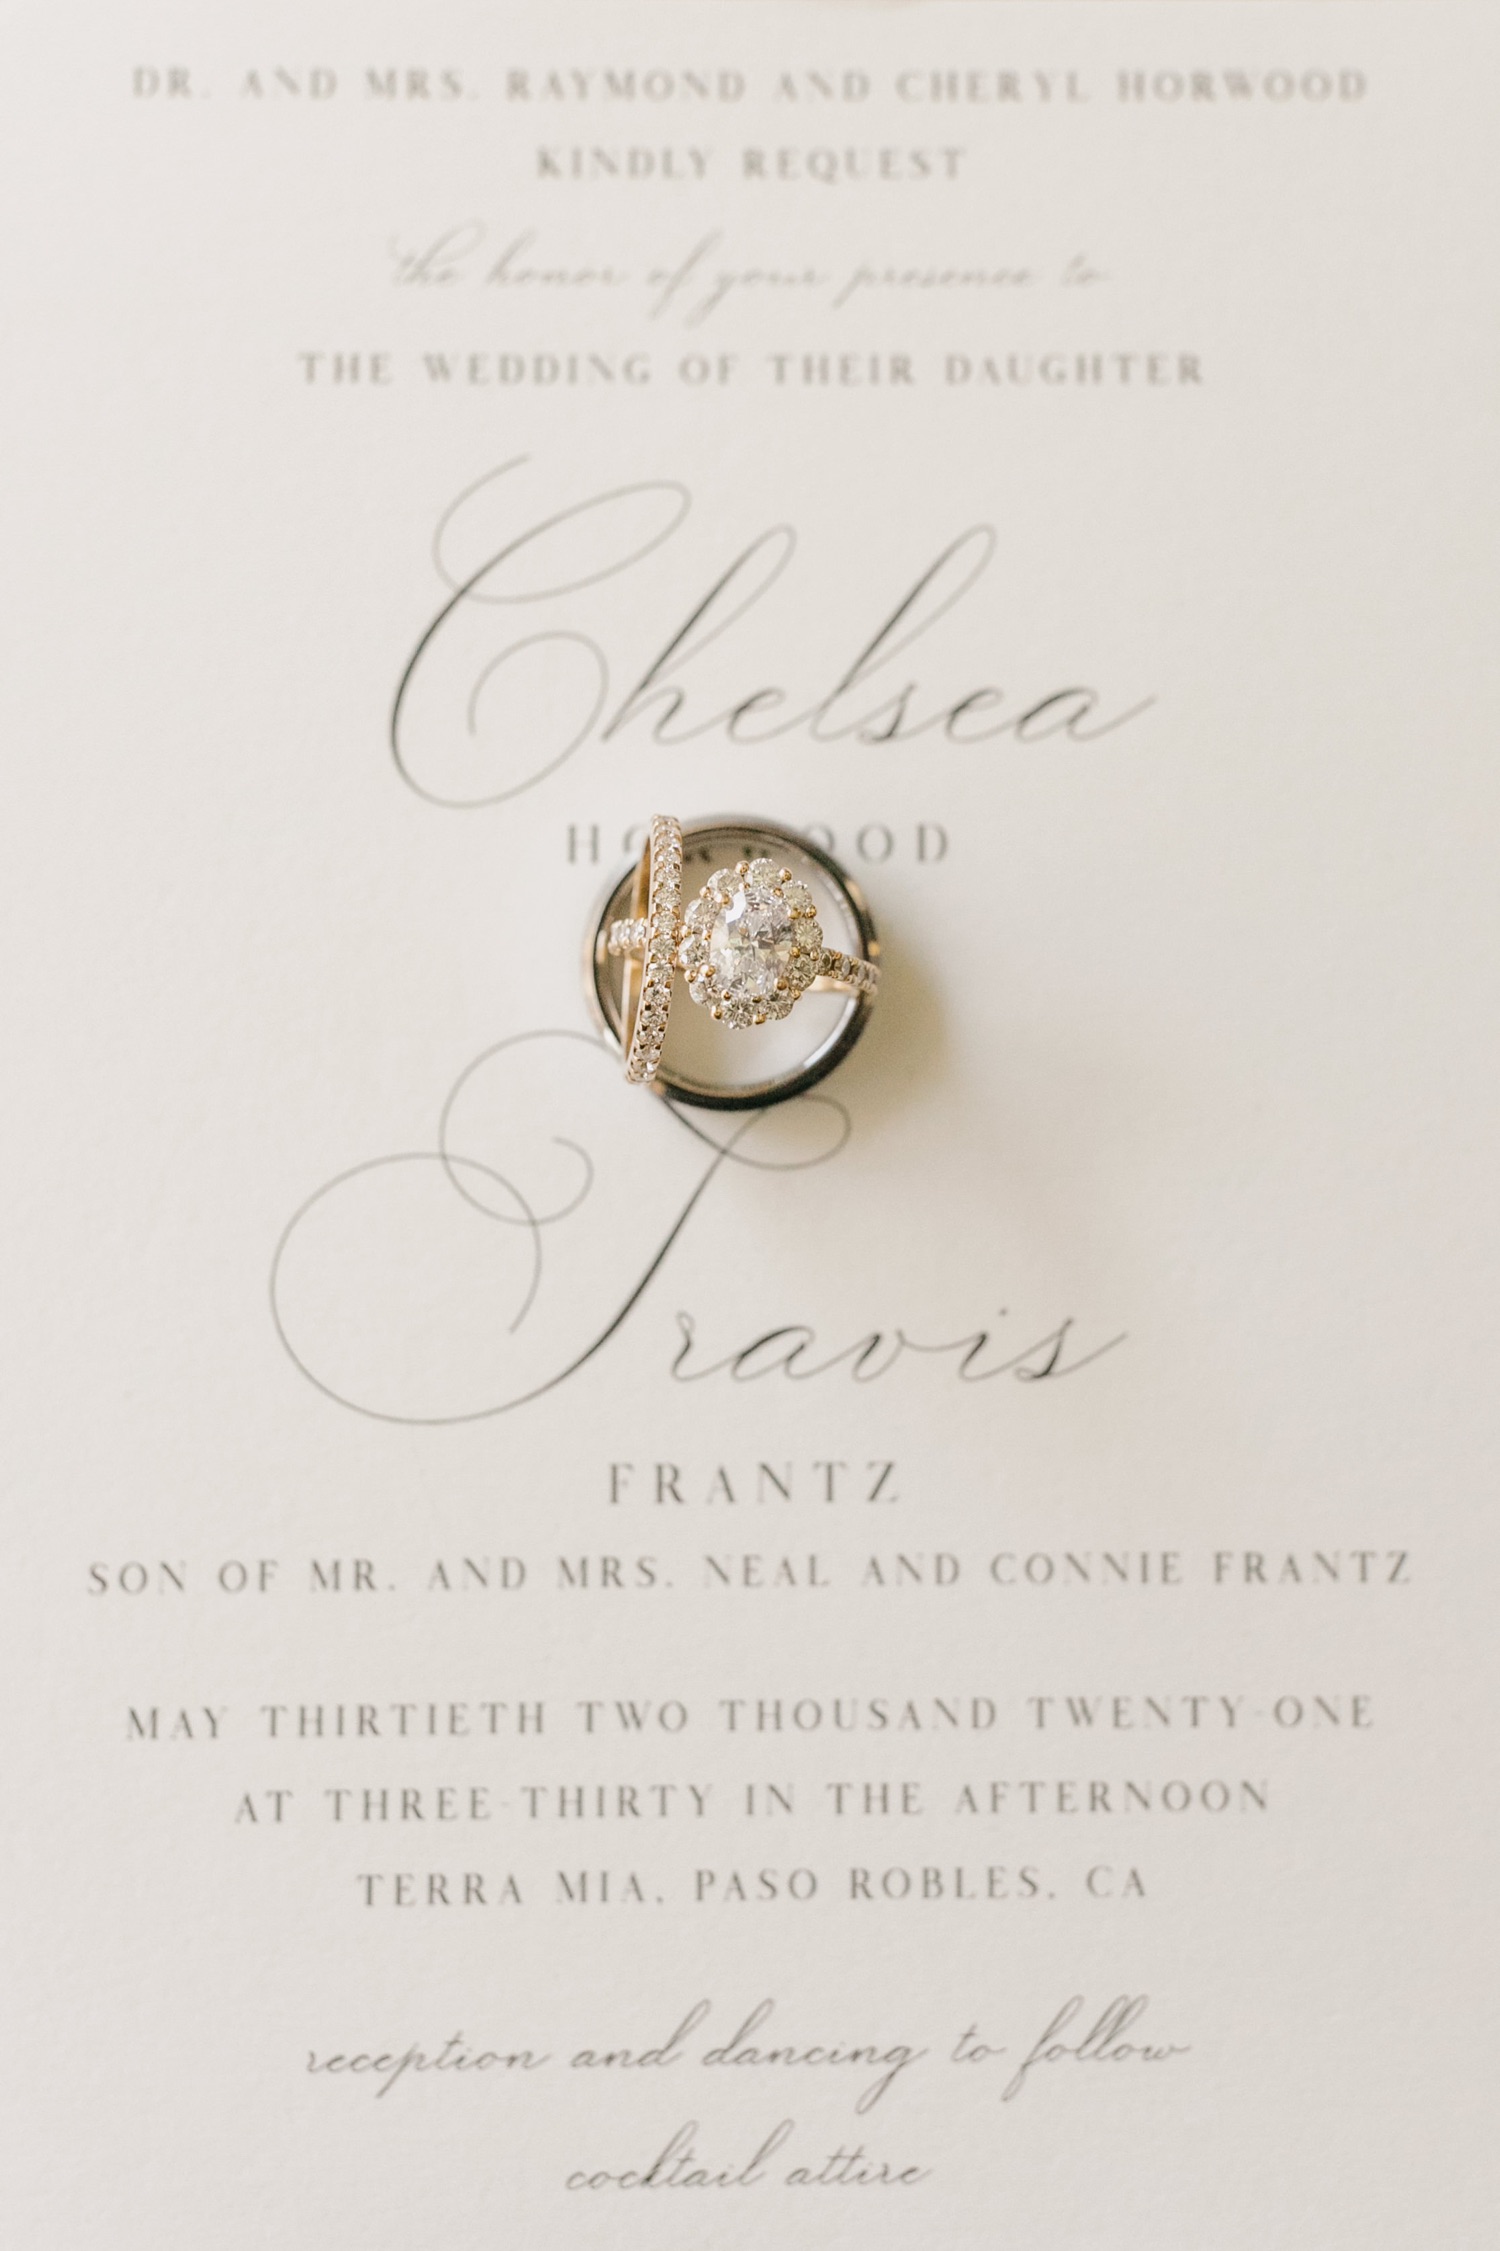 close up photo of rings on invite at terra mia wedding